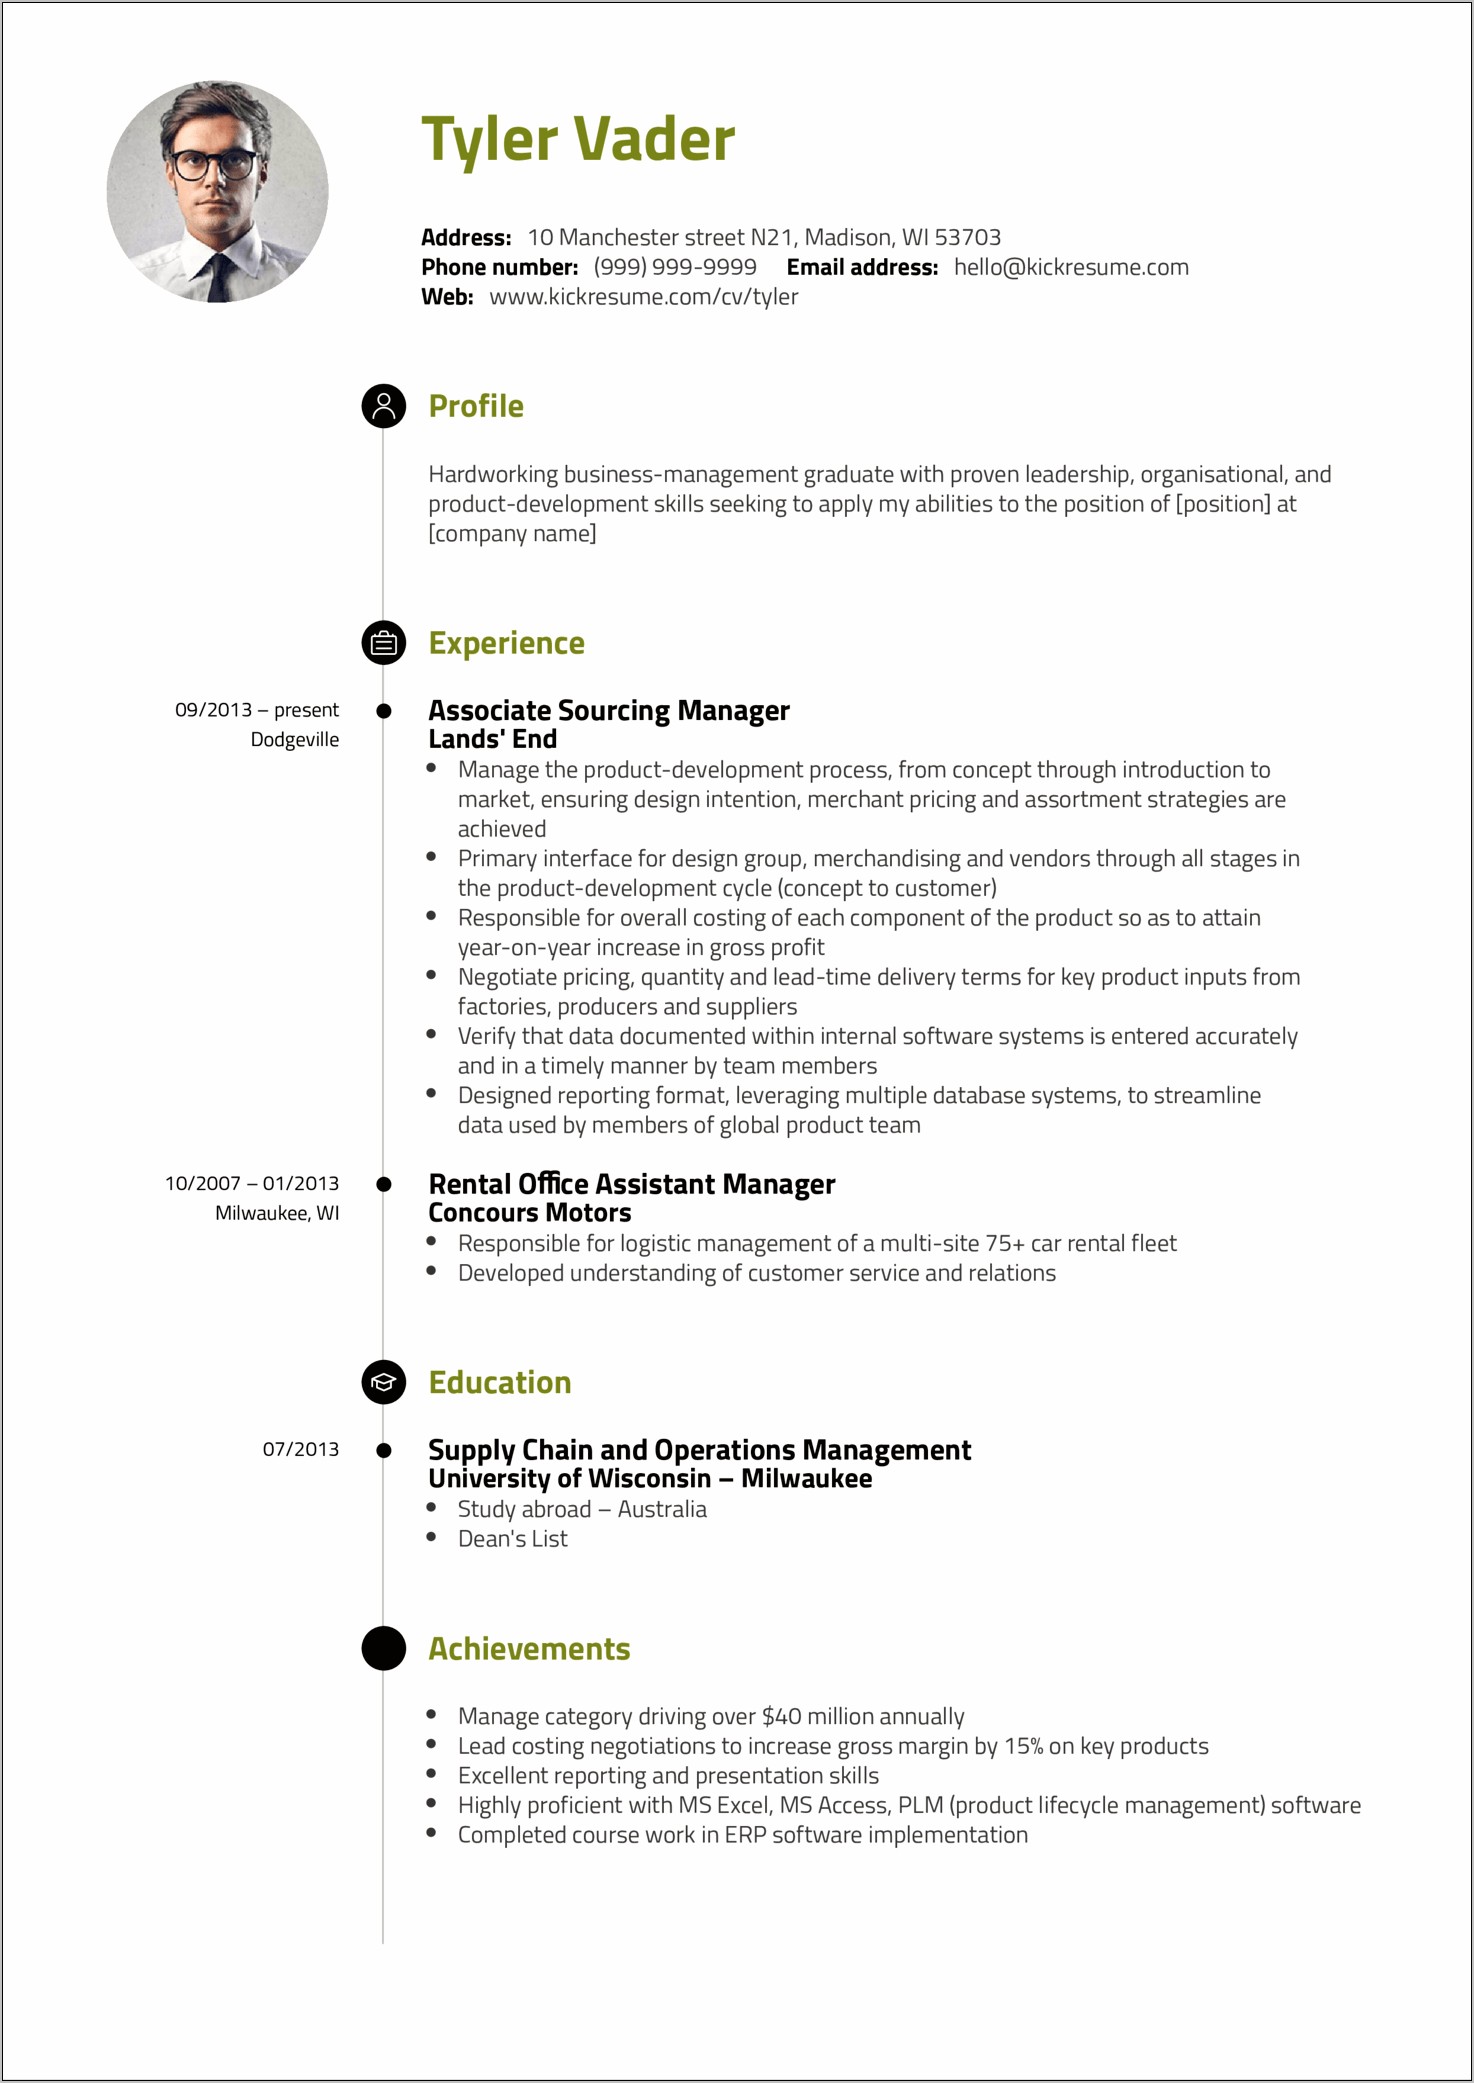 Resume Objective For Graduate Admision